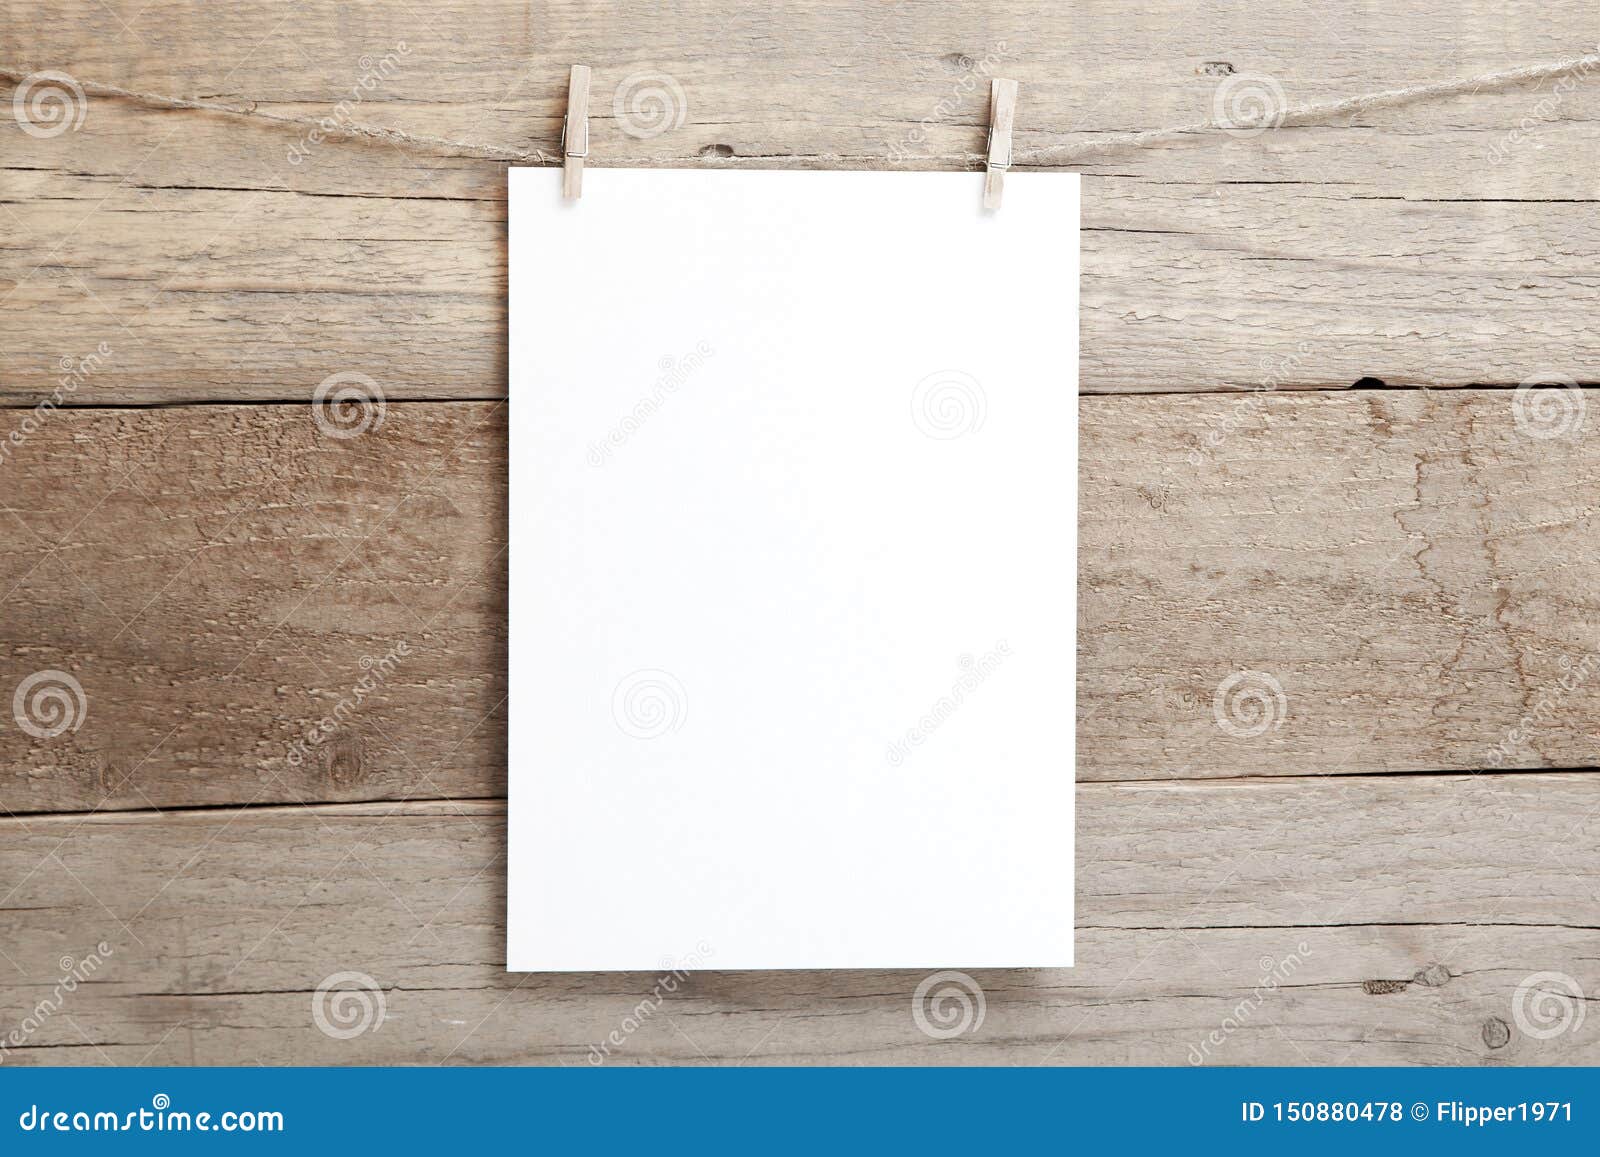 Download A4 Mock Up Empty Sheet Of Paper On A Wooden Background Blank A4 Sheet On Clothespins Stock Photo Image Of Sheet Space 150880478